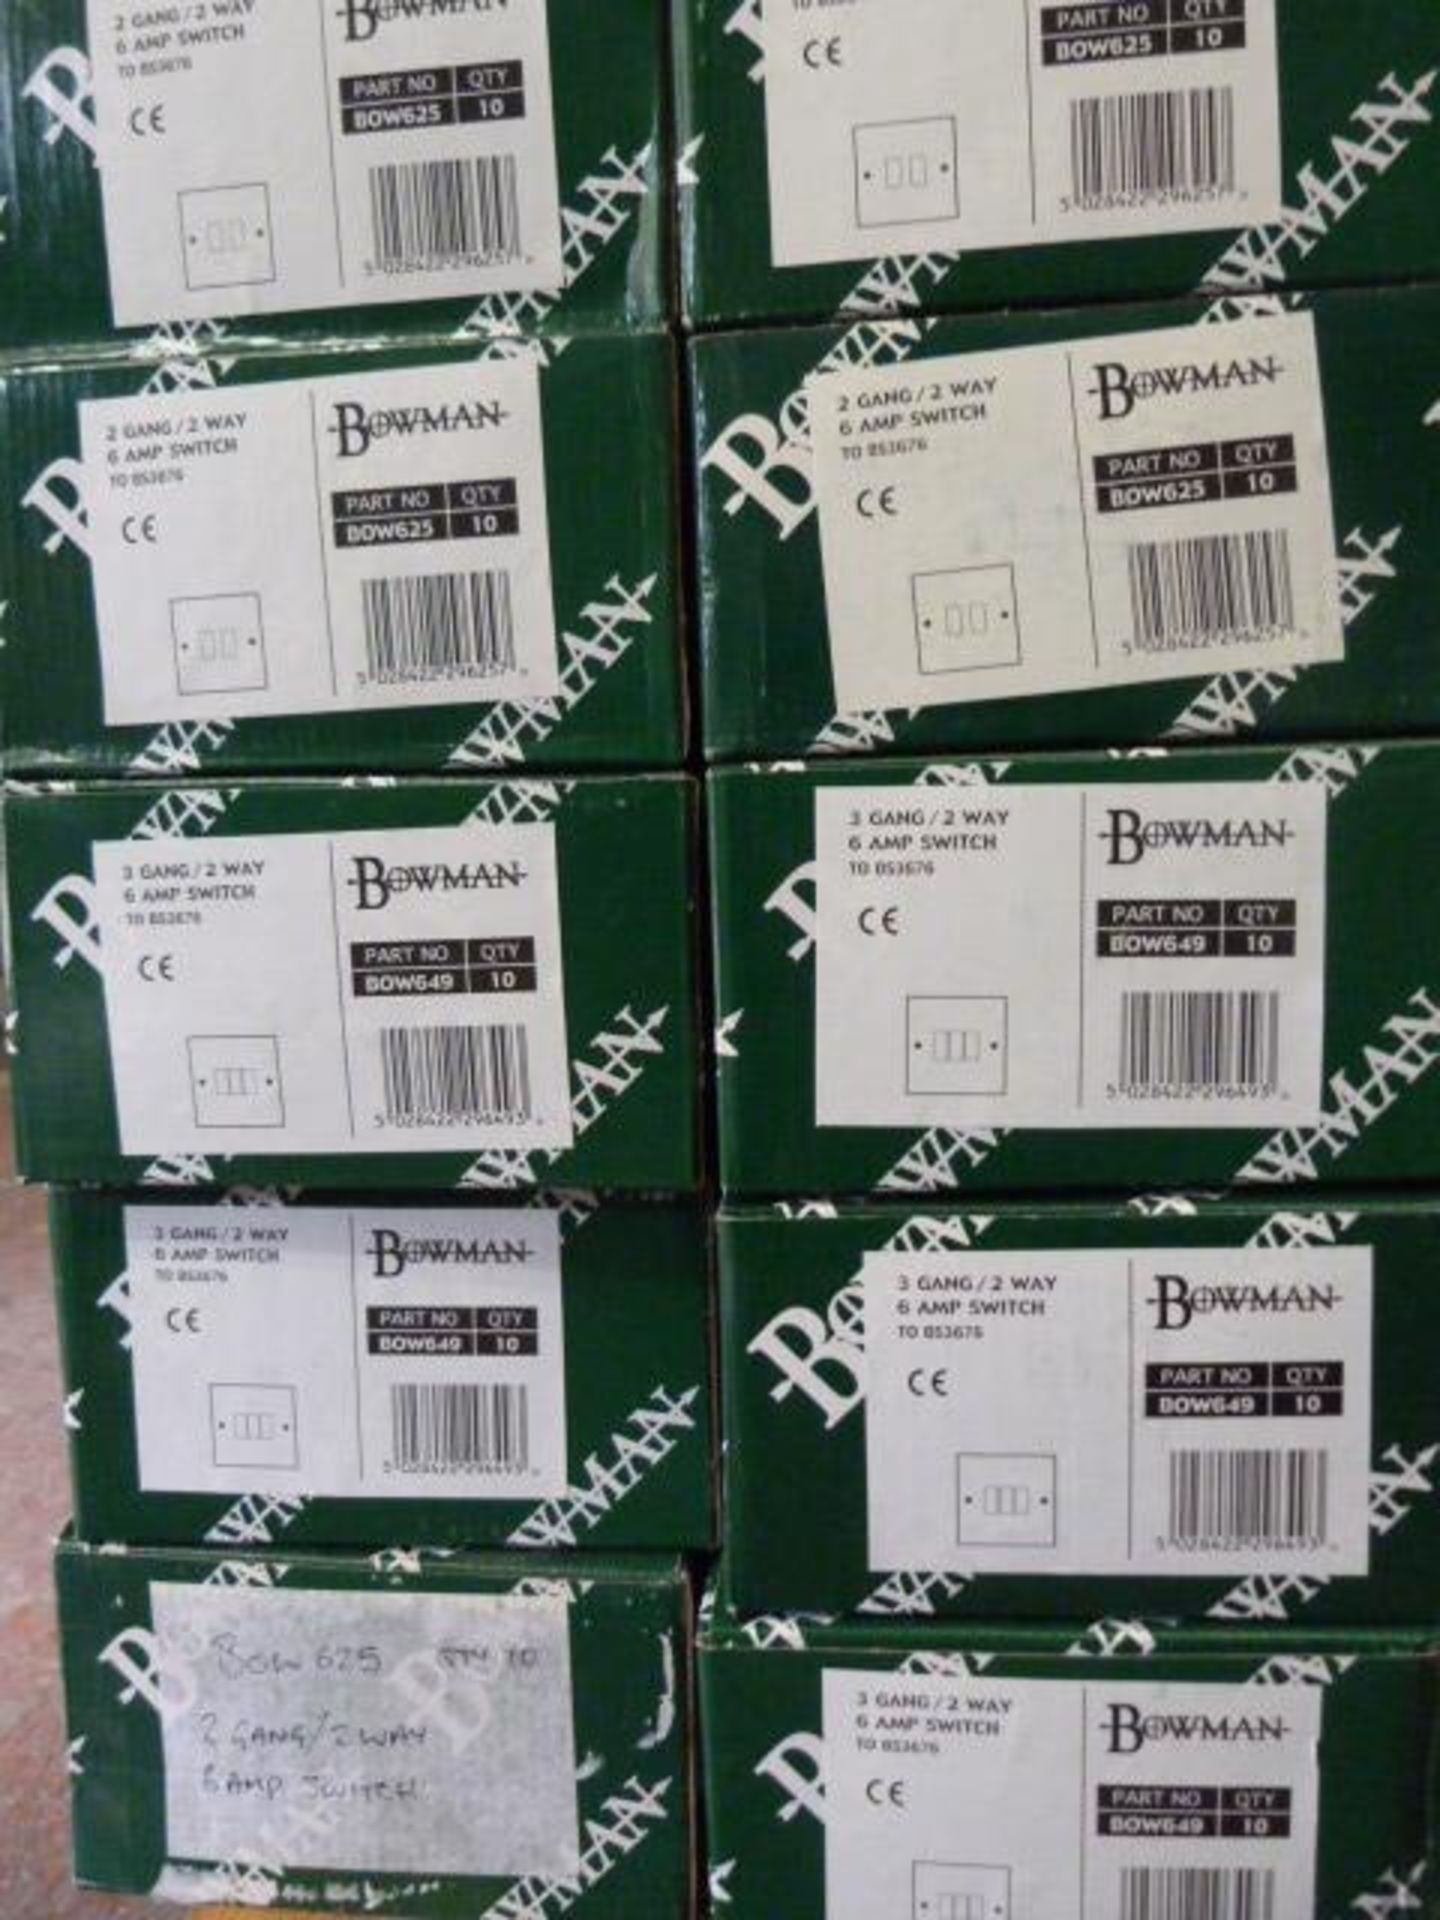 *Mixed Pallet - 2 Way Switches, Pattress Boxes, Dry Lining Boxes, Blank Plates etc - Image 3 of 3